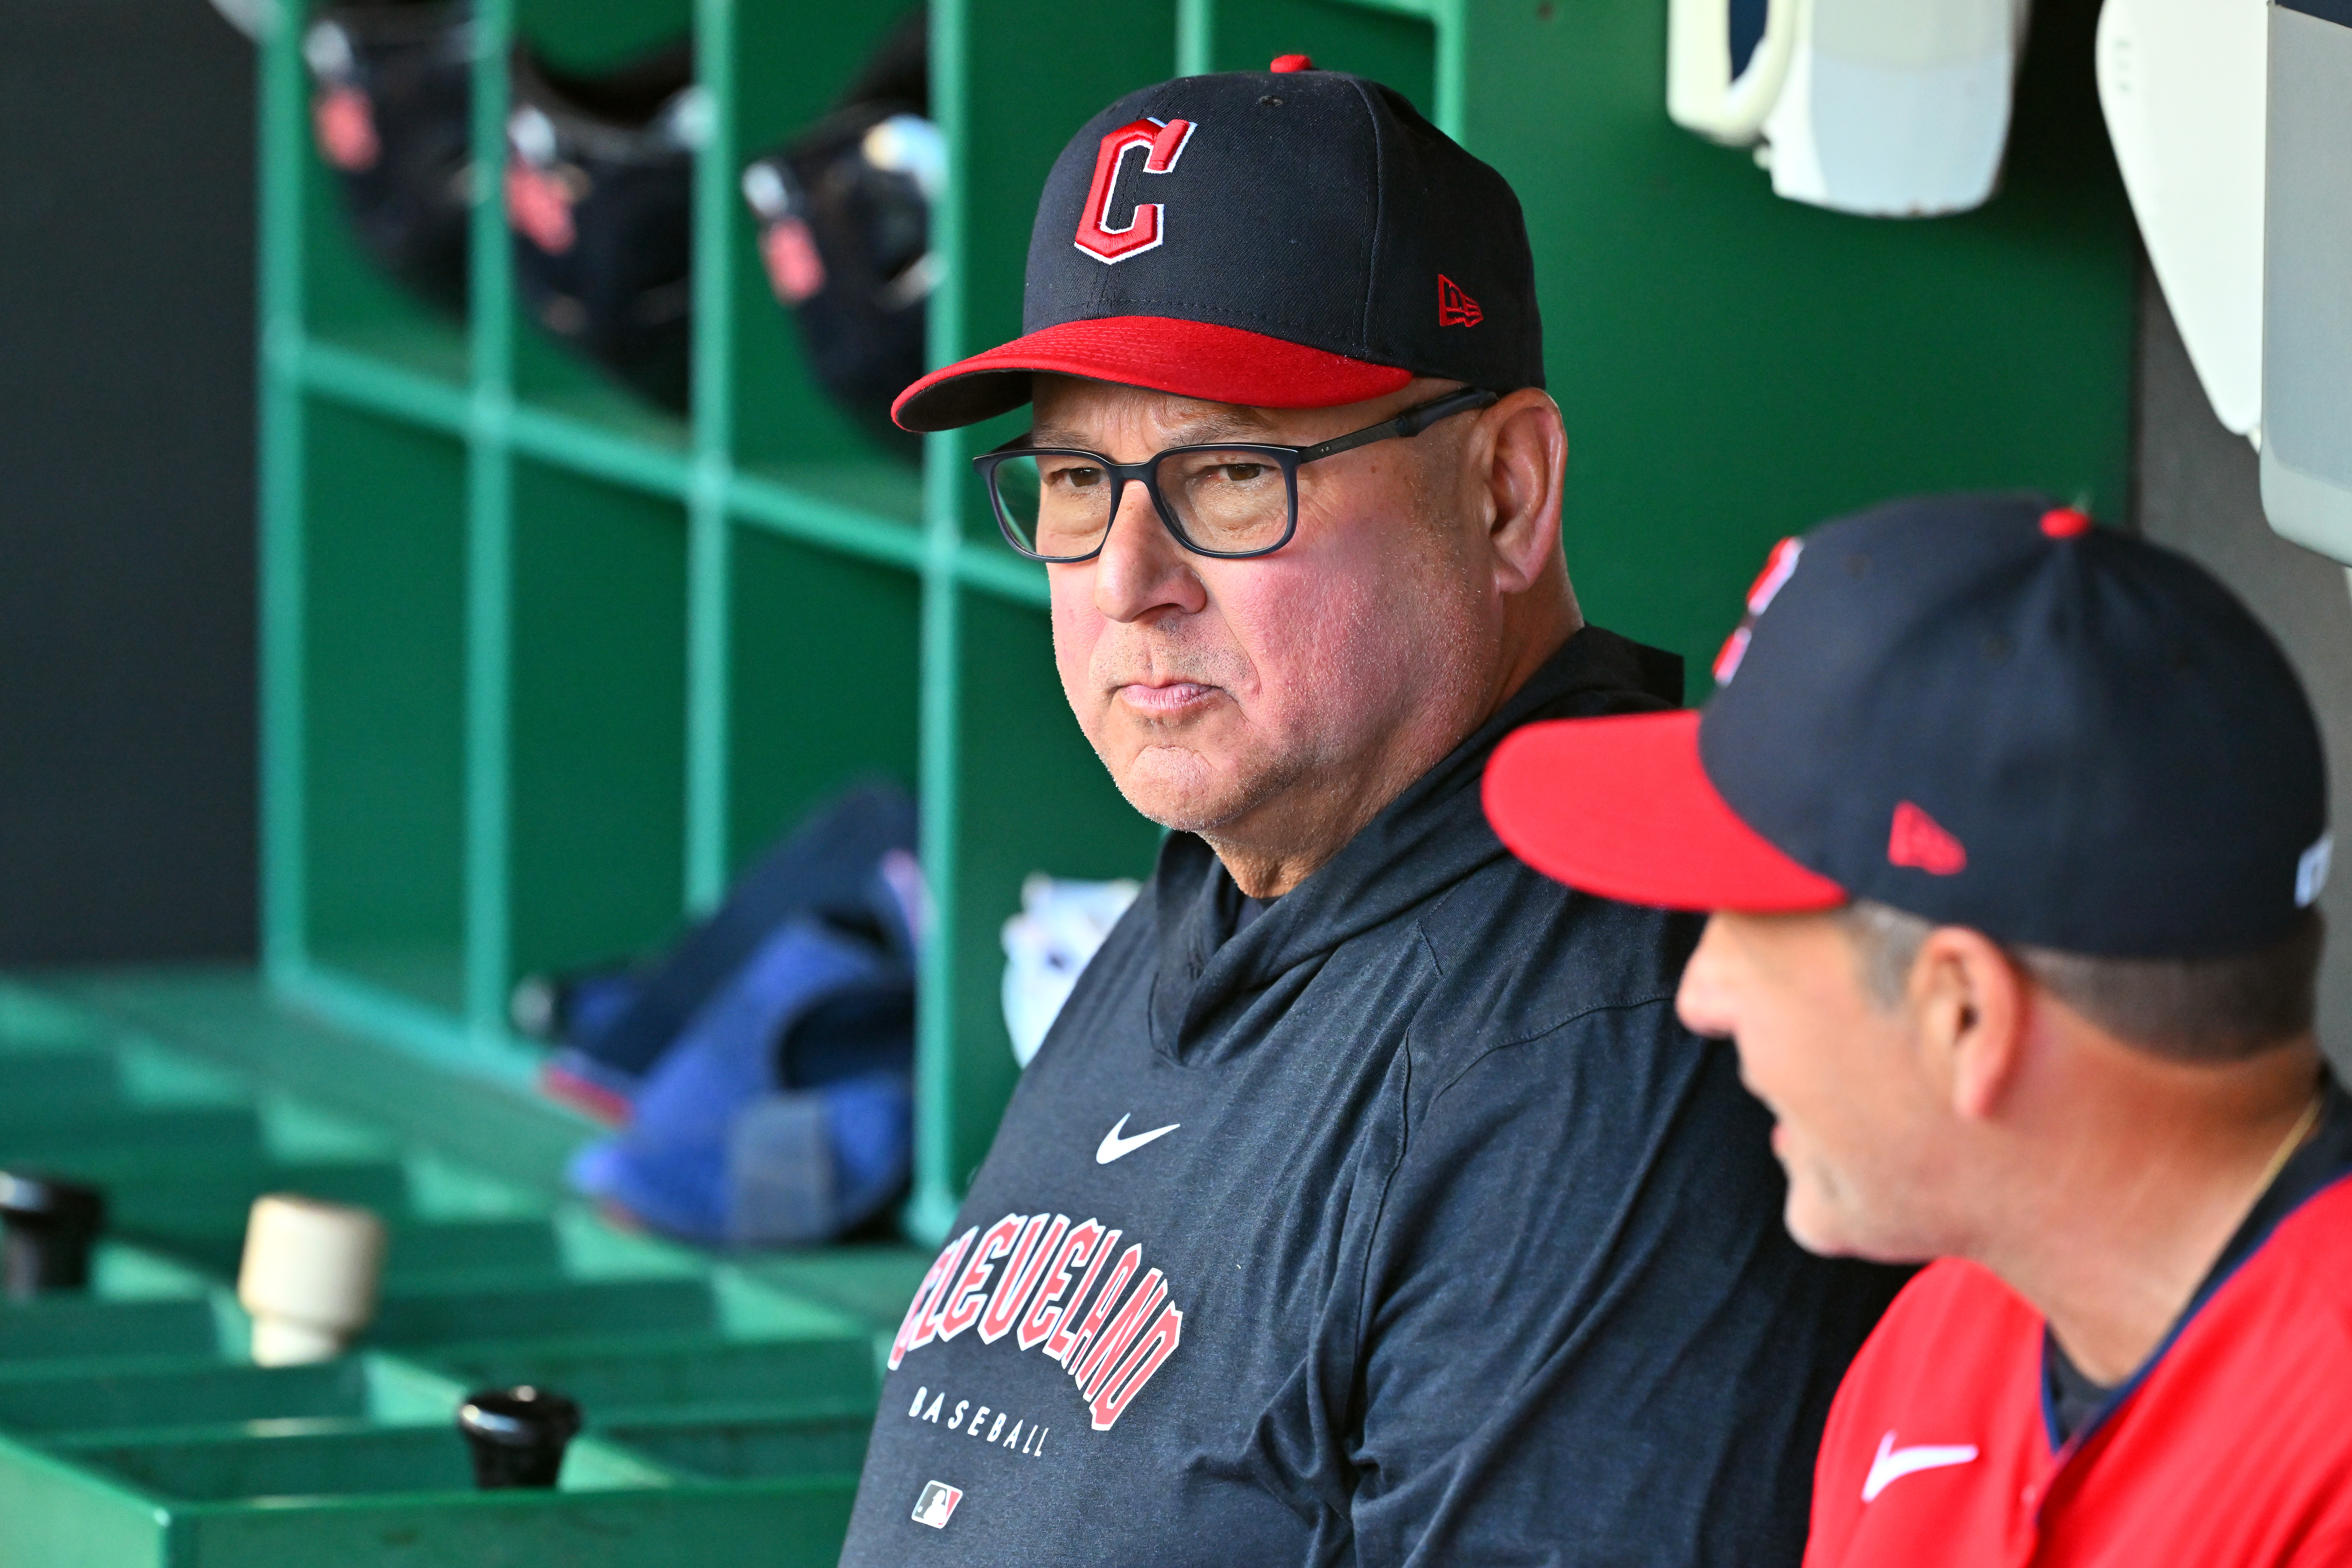 Catching up with Terry Francona, who plans to be back in the